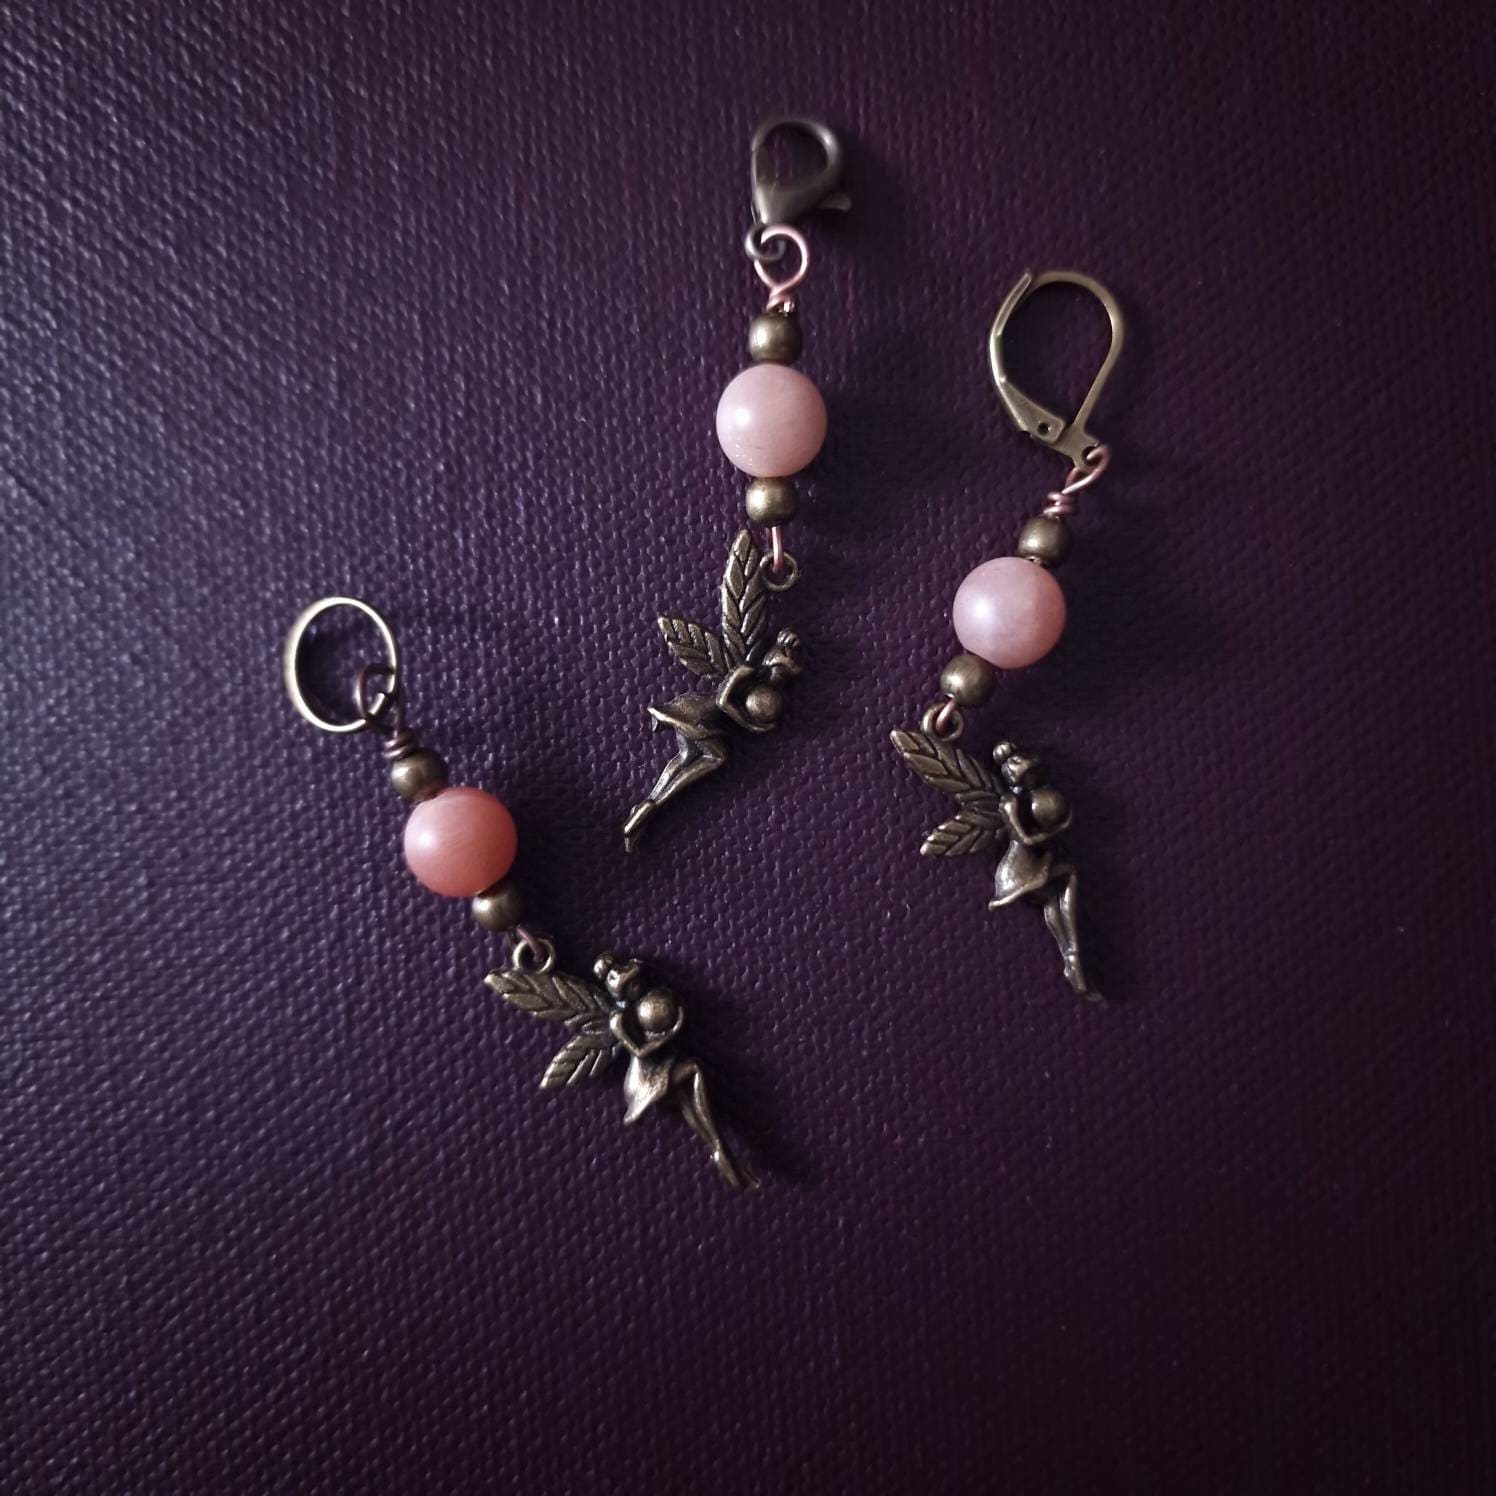 Stitch marker ~ Moon Fairy ~ Knitting notions, progress markers, progress keepers, crochet notions, gift for knitter